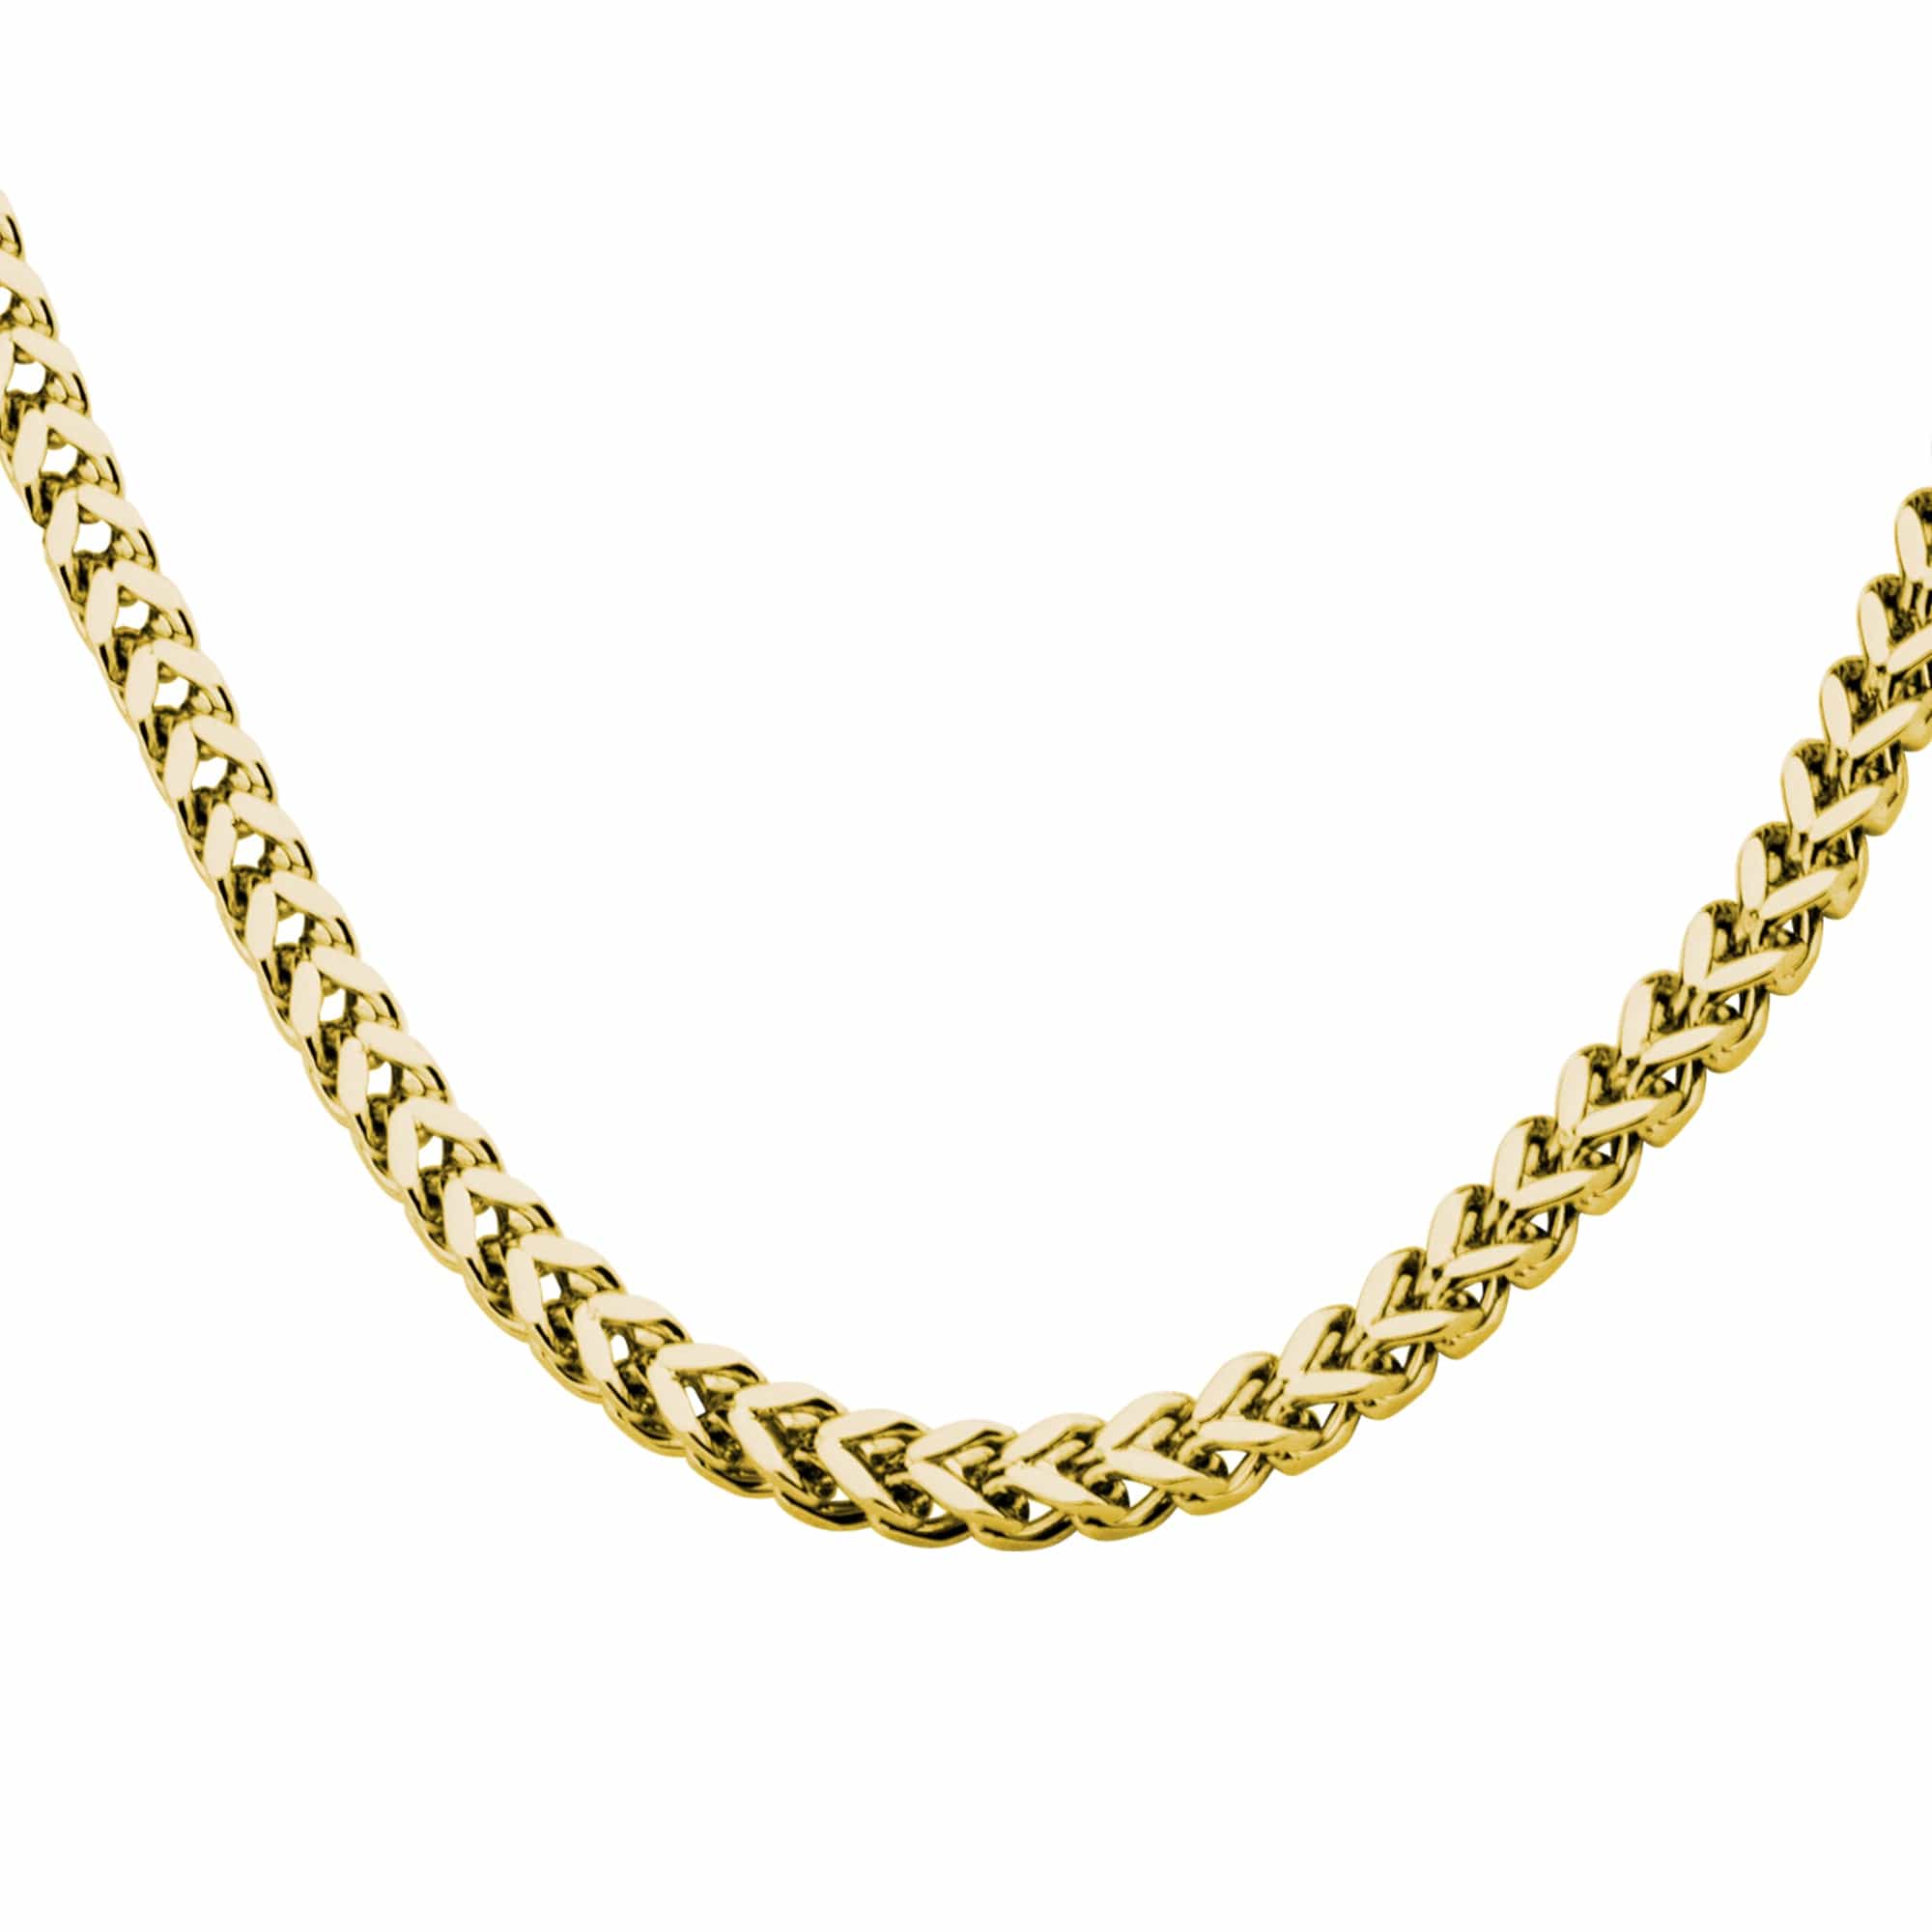 INOX JEWELRY Chains Golden Tone Stainless Steel 4mm Franco Link Chain